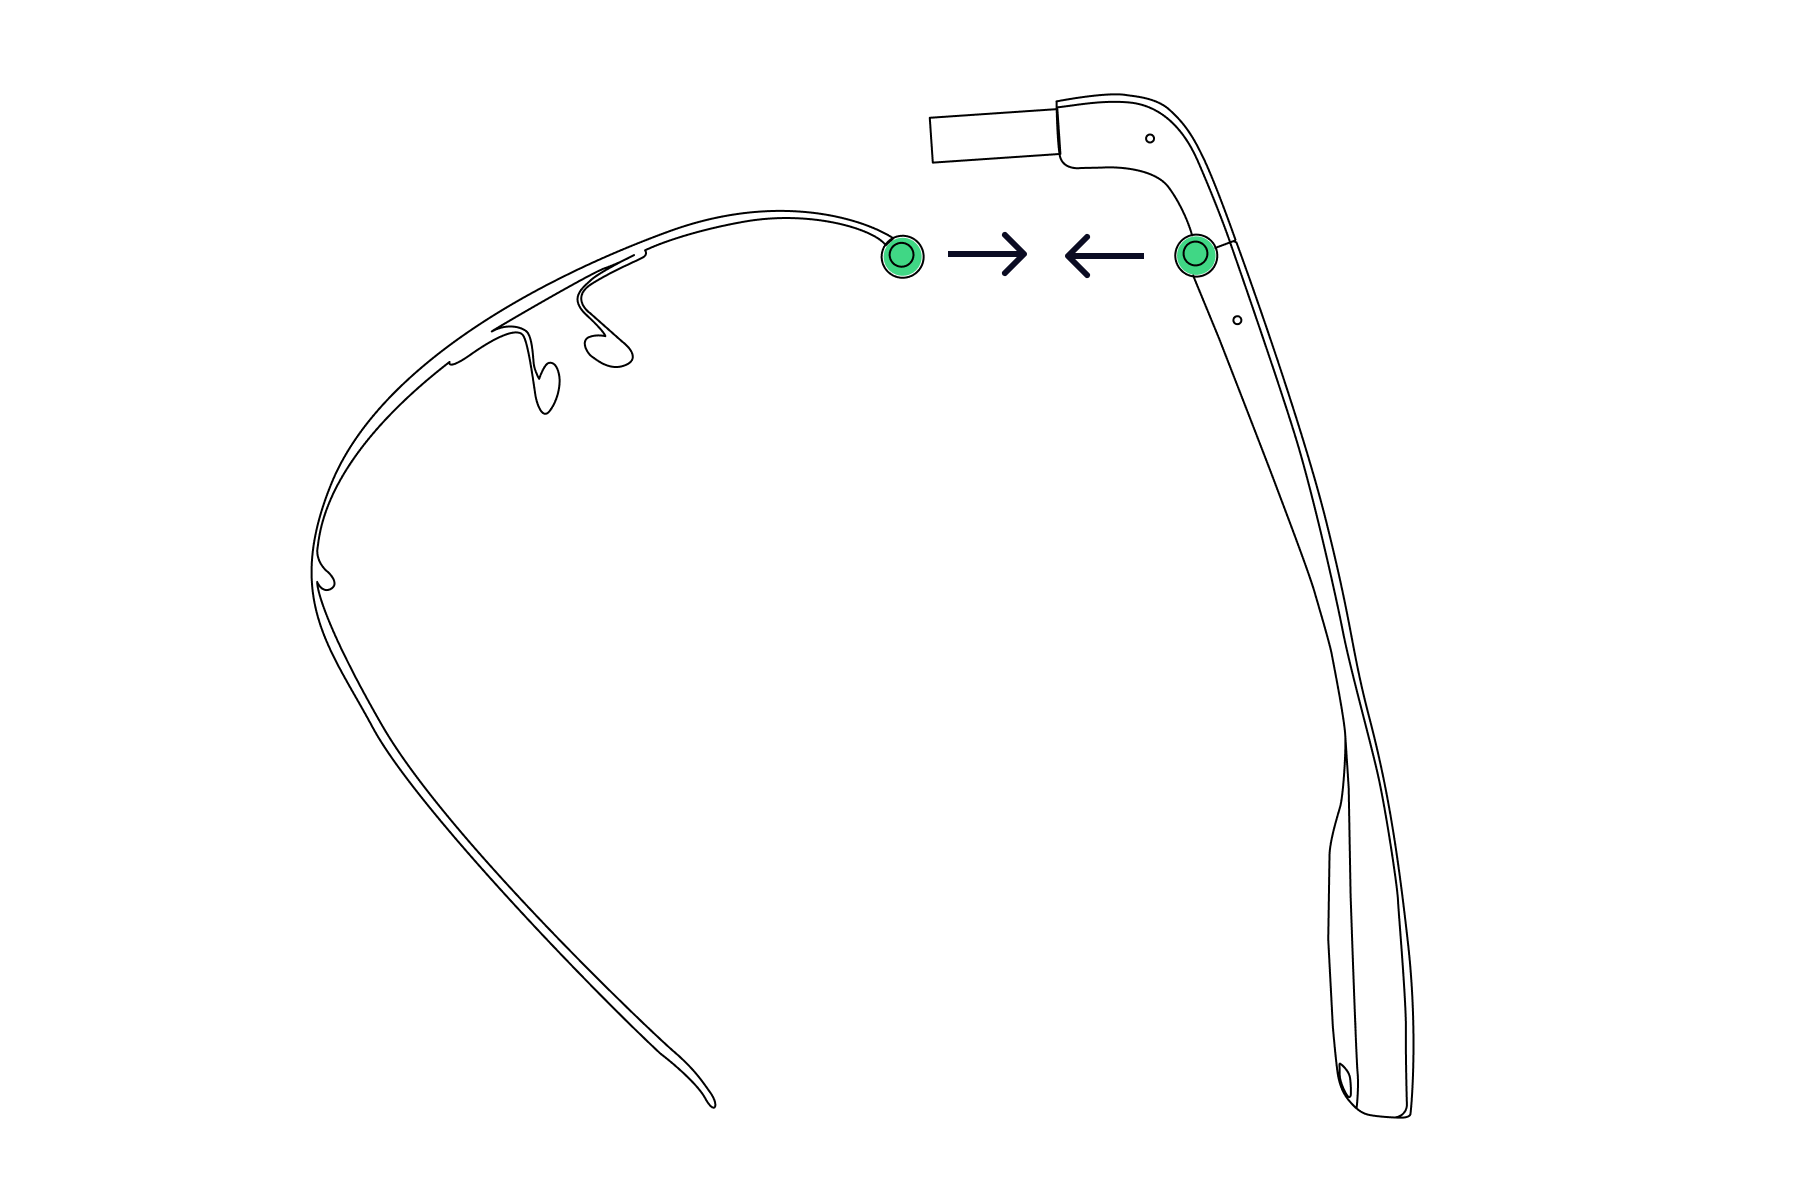 Illustration of how to assemble the Envision Glasses. The attachment of the Envision glasses body and titanium frame is presented. It is indicated where to connect the Envision glasses body and titanium frame. This is the top right corner of the Envision Glasses Body and the right most corner of the titanium frame.